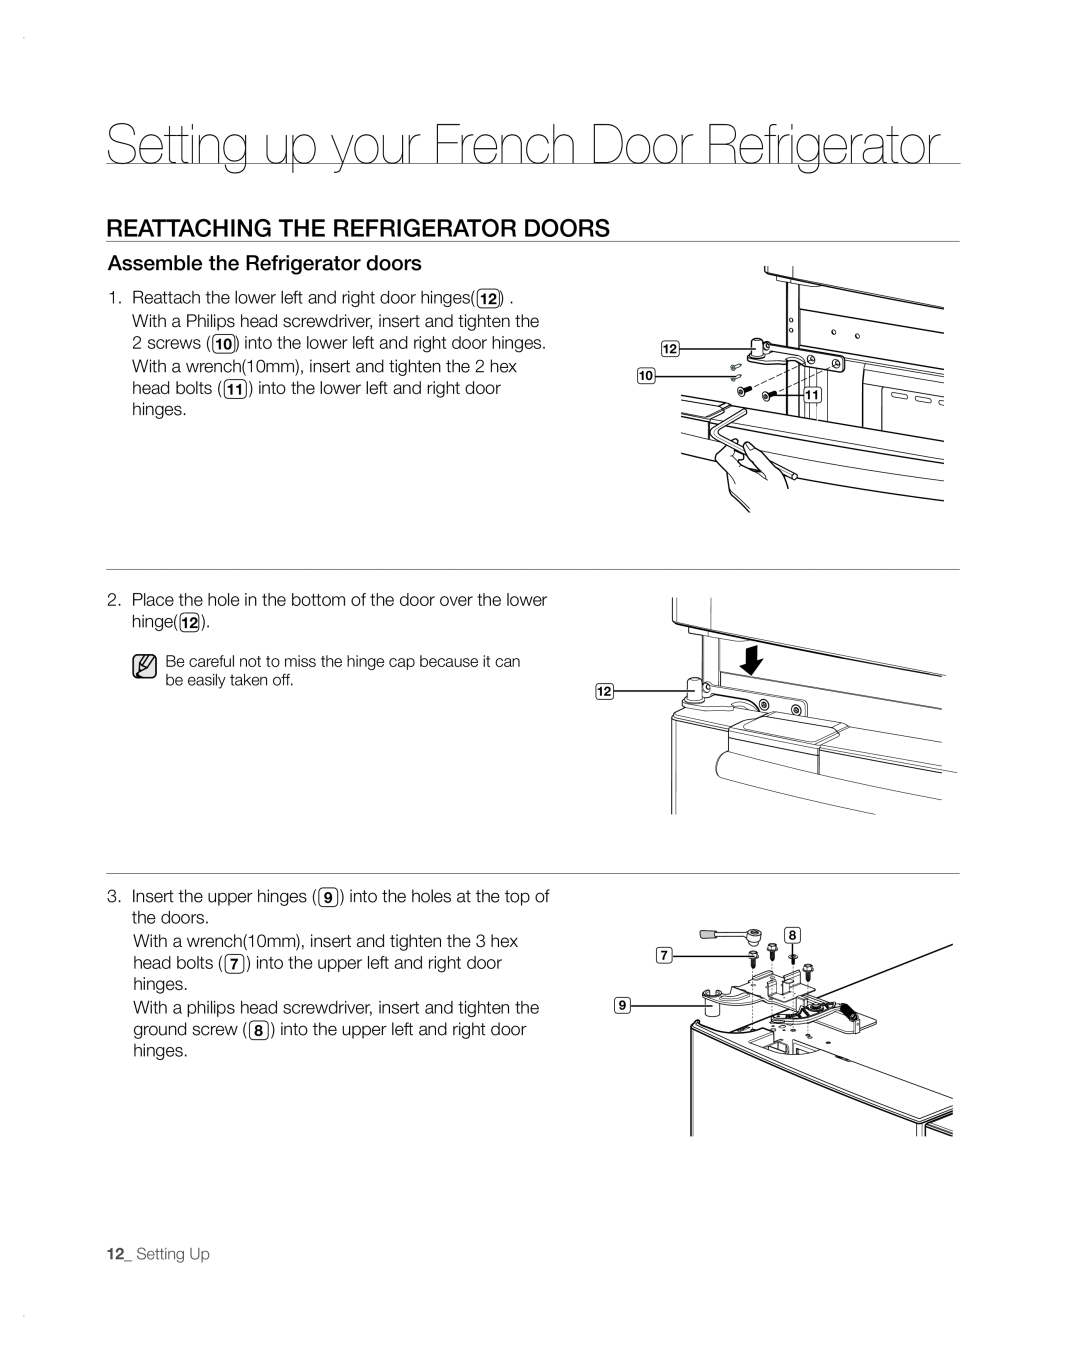 Samsung RFG297AA user manual REAttACHinG tHE REFRiGERAtoR DooRs, Setting up your French Door Refrigerator 